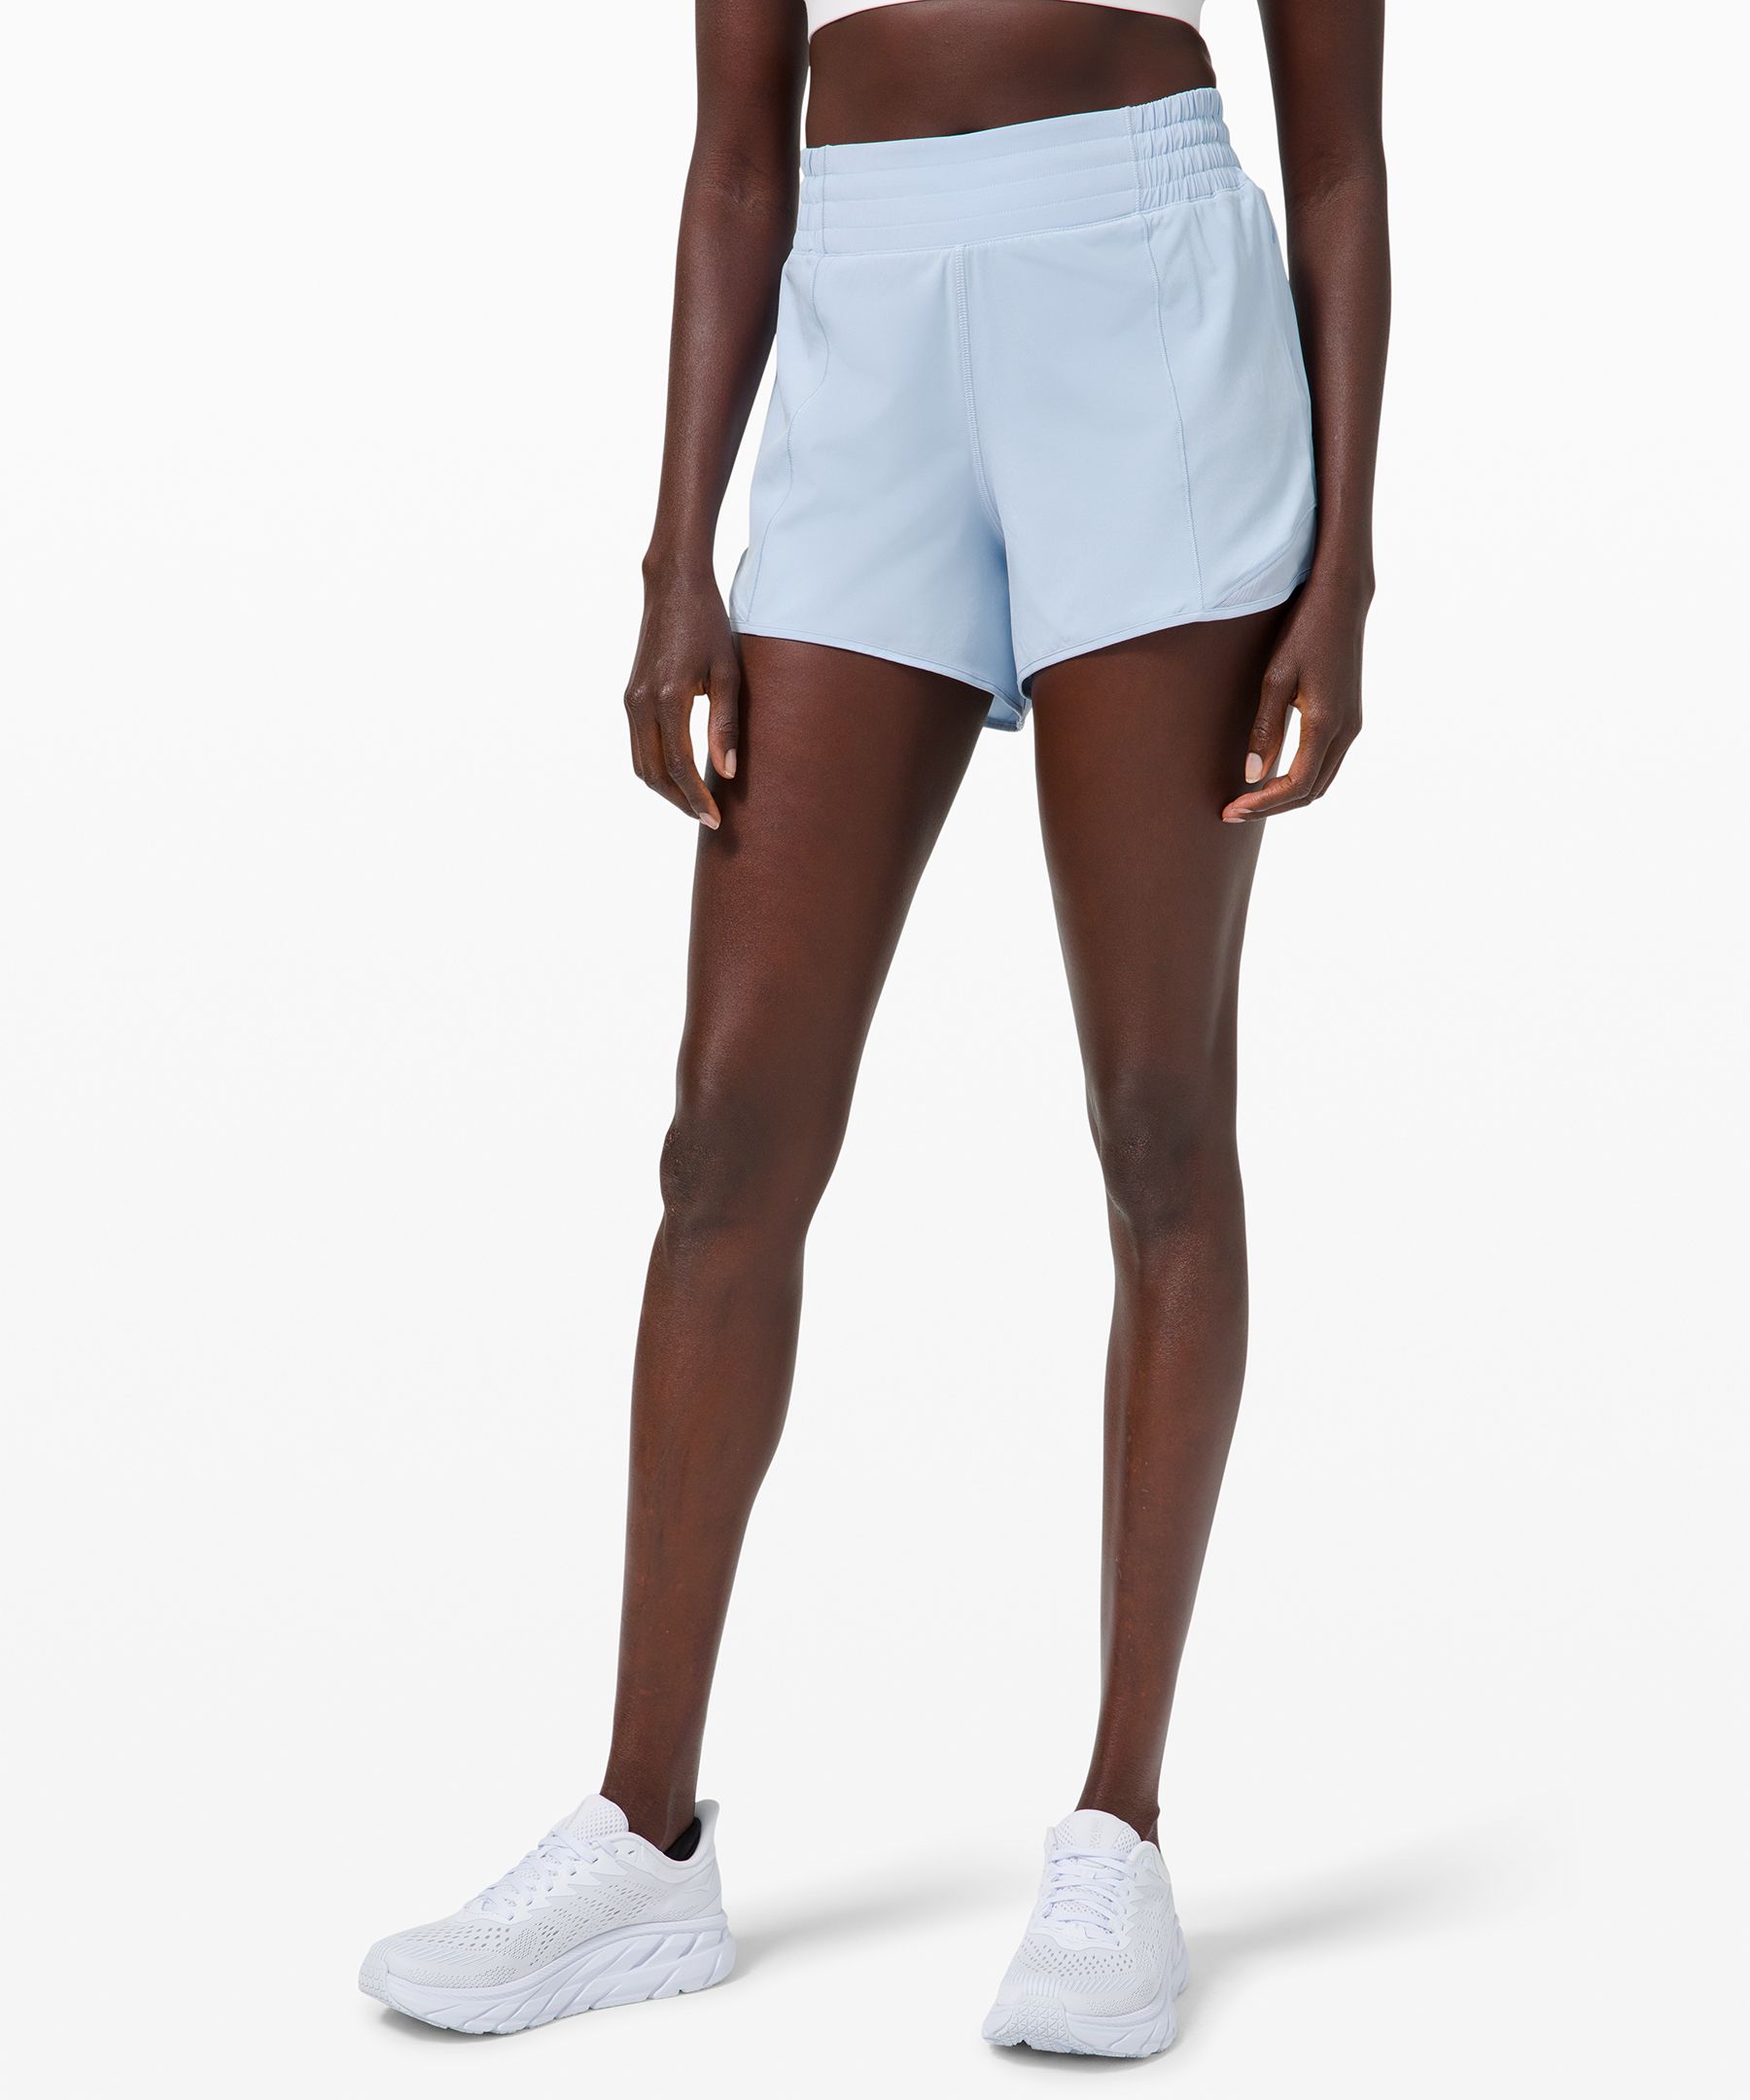 Lululemon Hotty Hot High-rise Lined Shorts 4" In Blue Linen